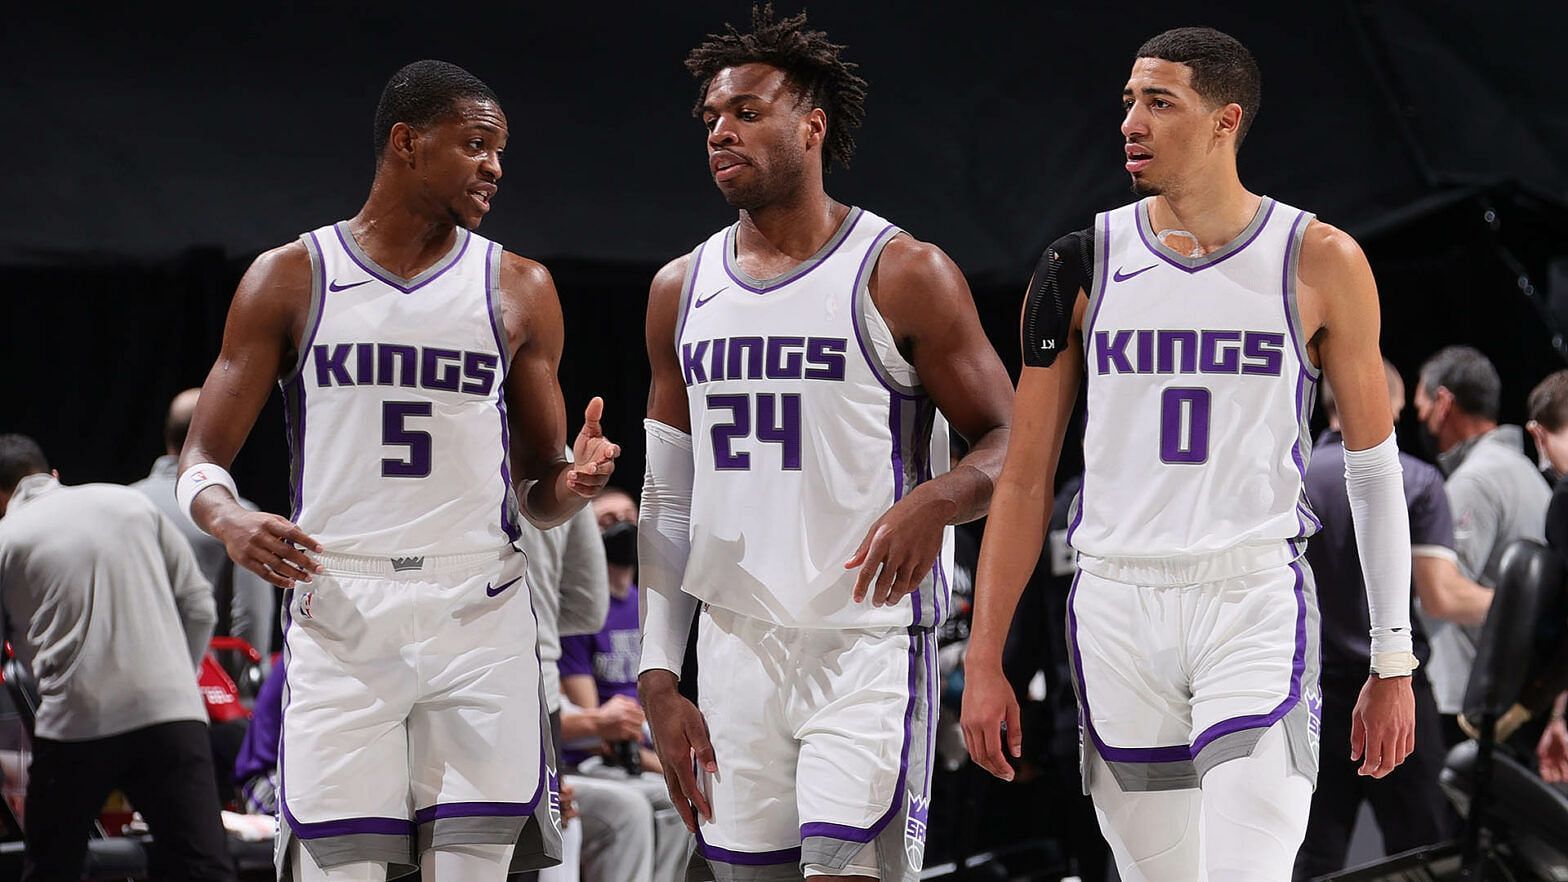 The Sacramento Kings have to drastically improve their defense to remain in play-in contention. [Photo: NBA.com]